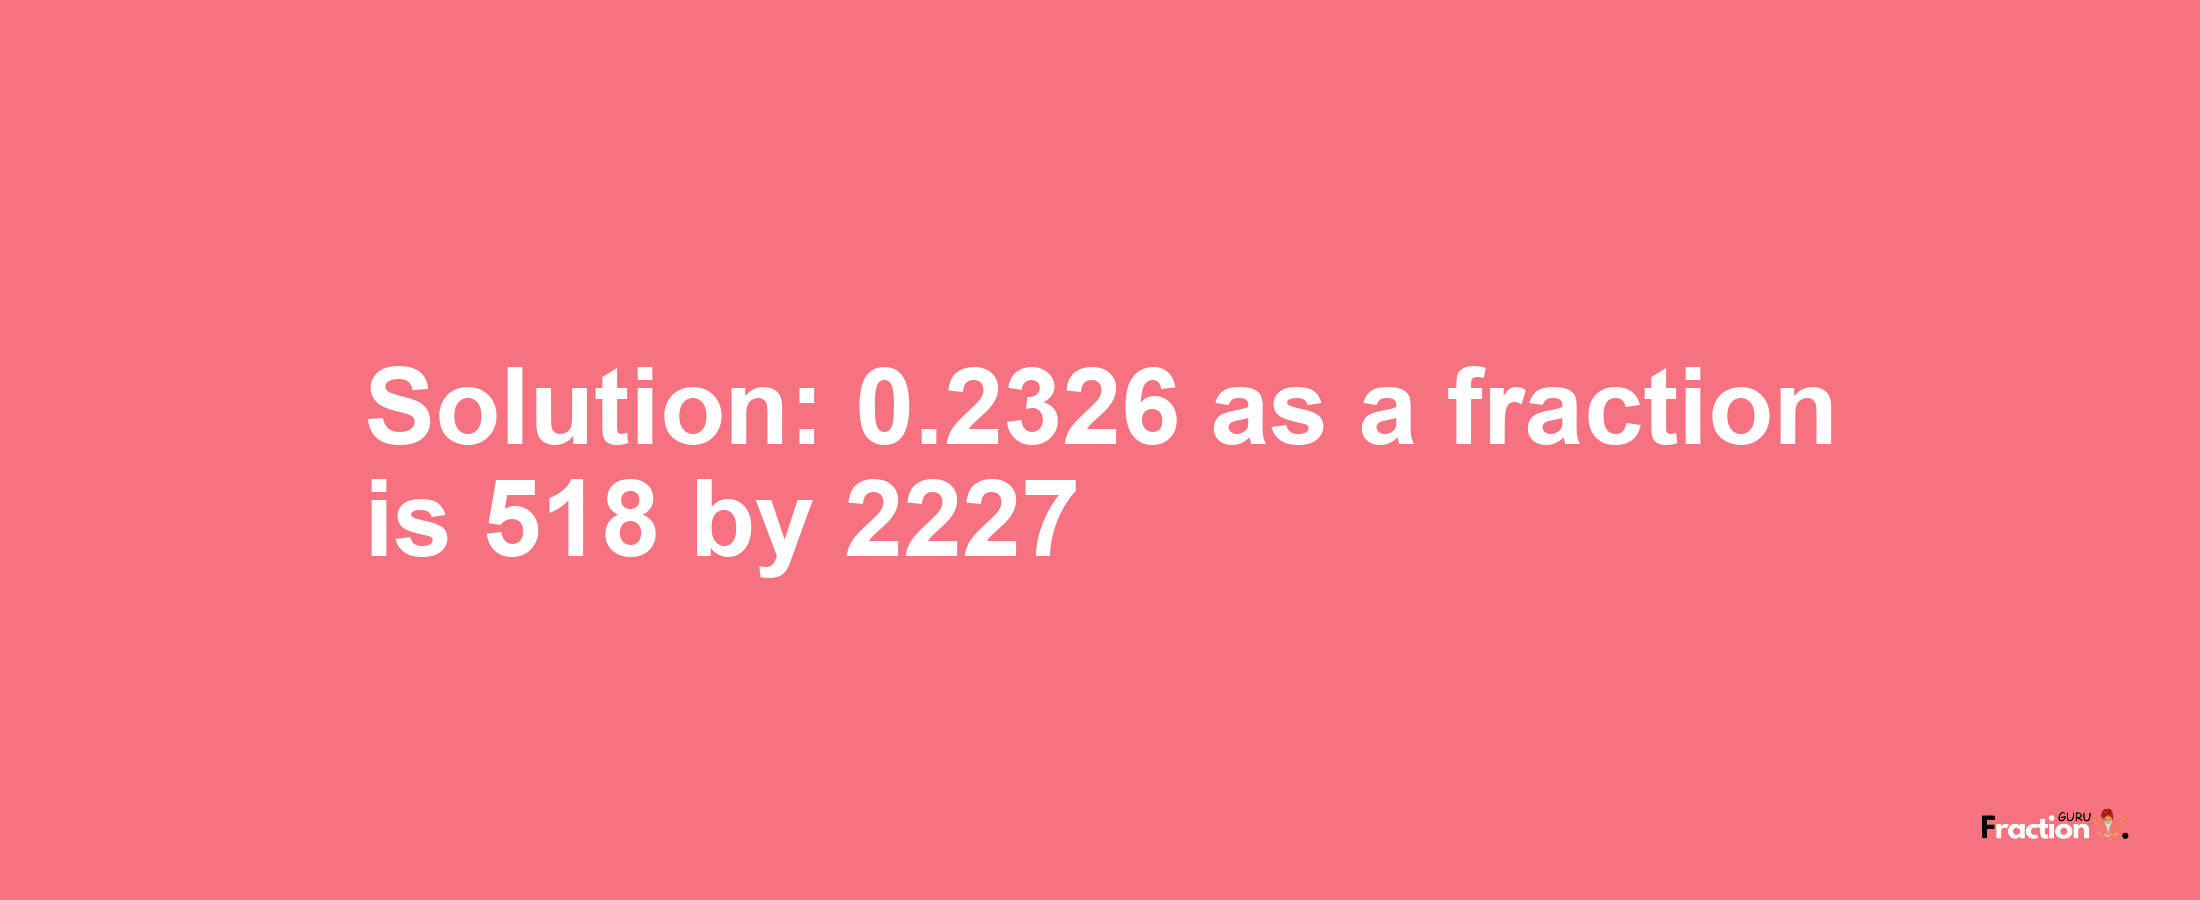 Solution:0.2326 as a fraction is 518/2227